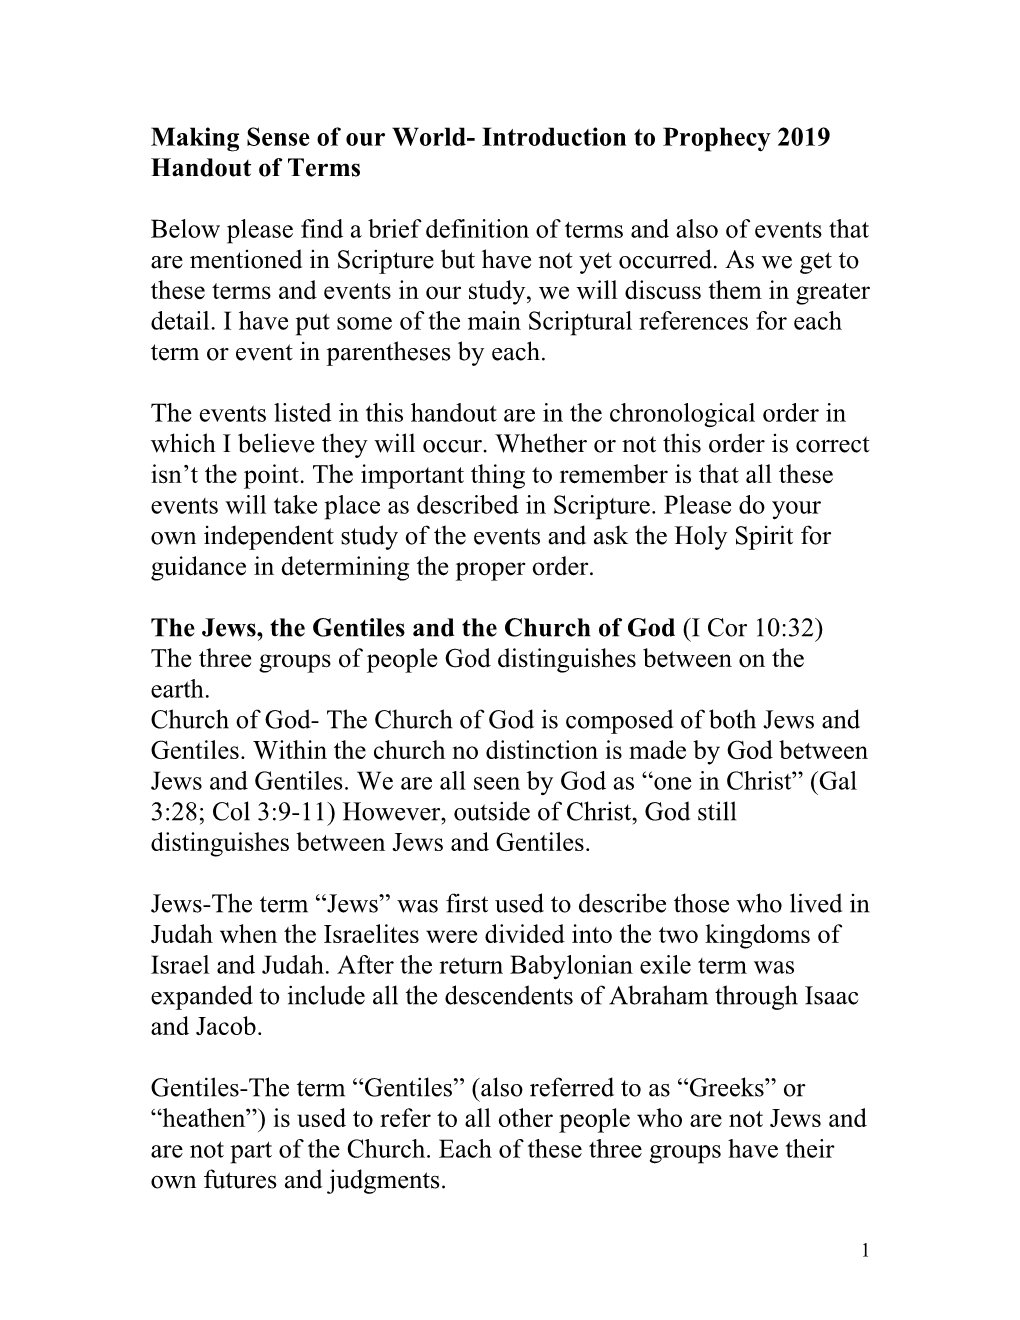 Making Sense of Our World- Introduction to Prophecy 2019 Handout of Terms